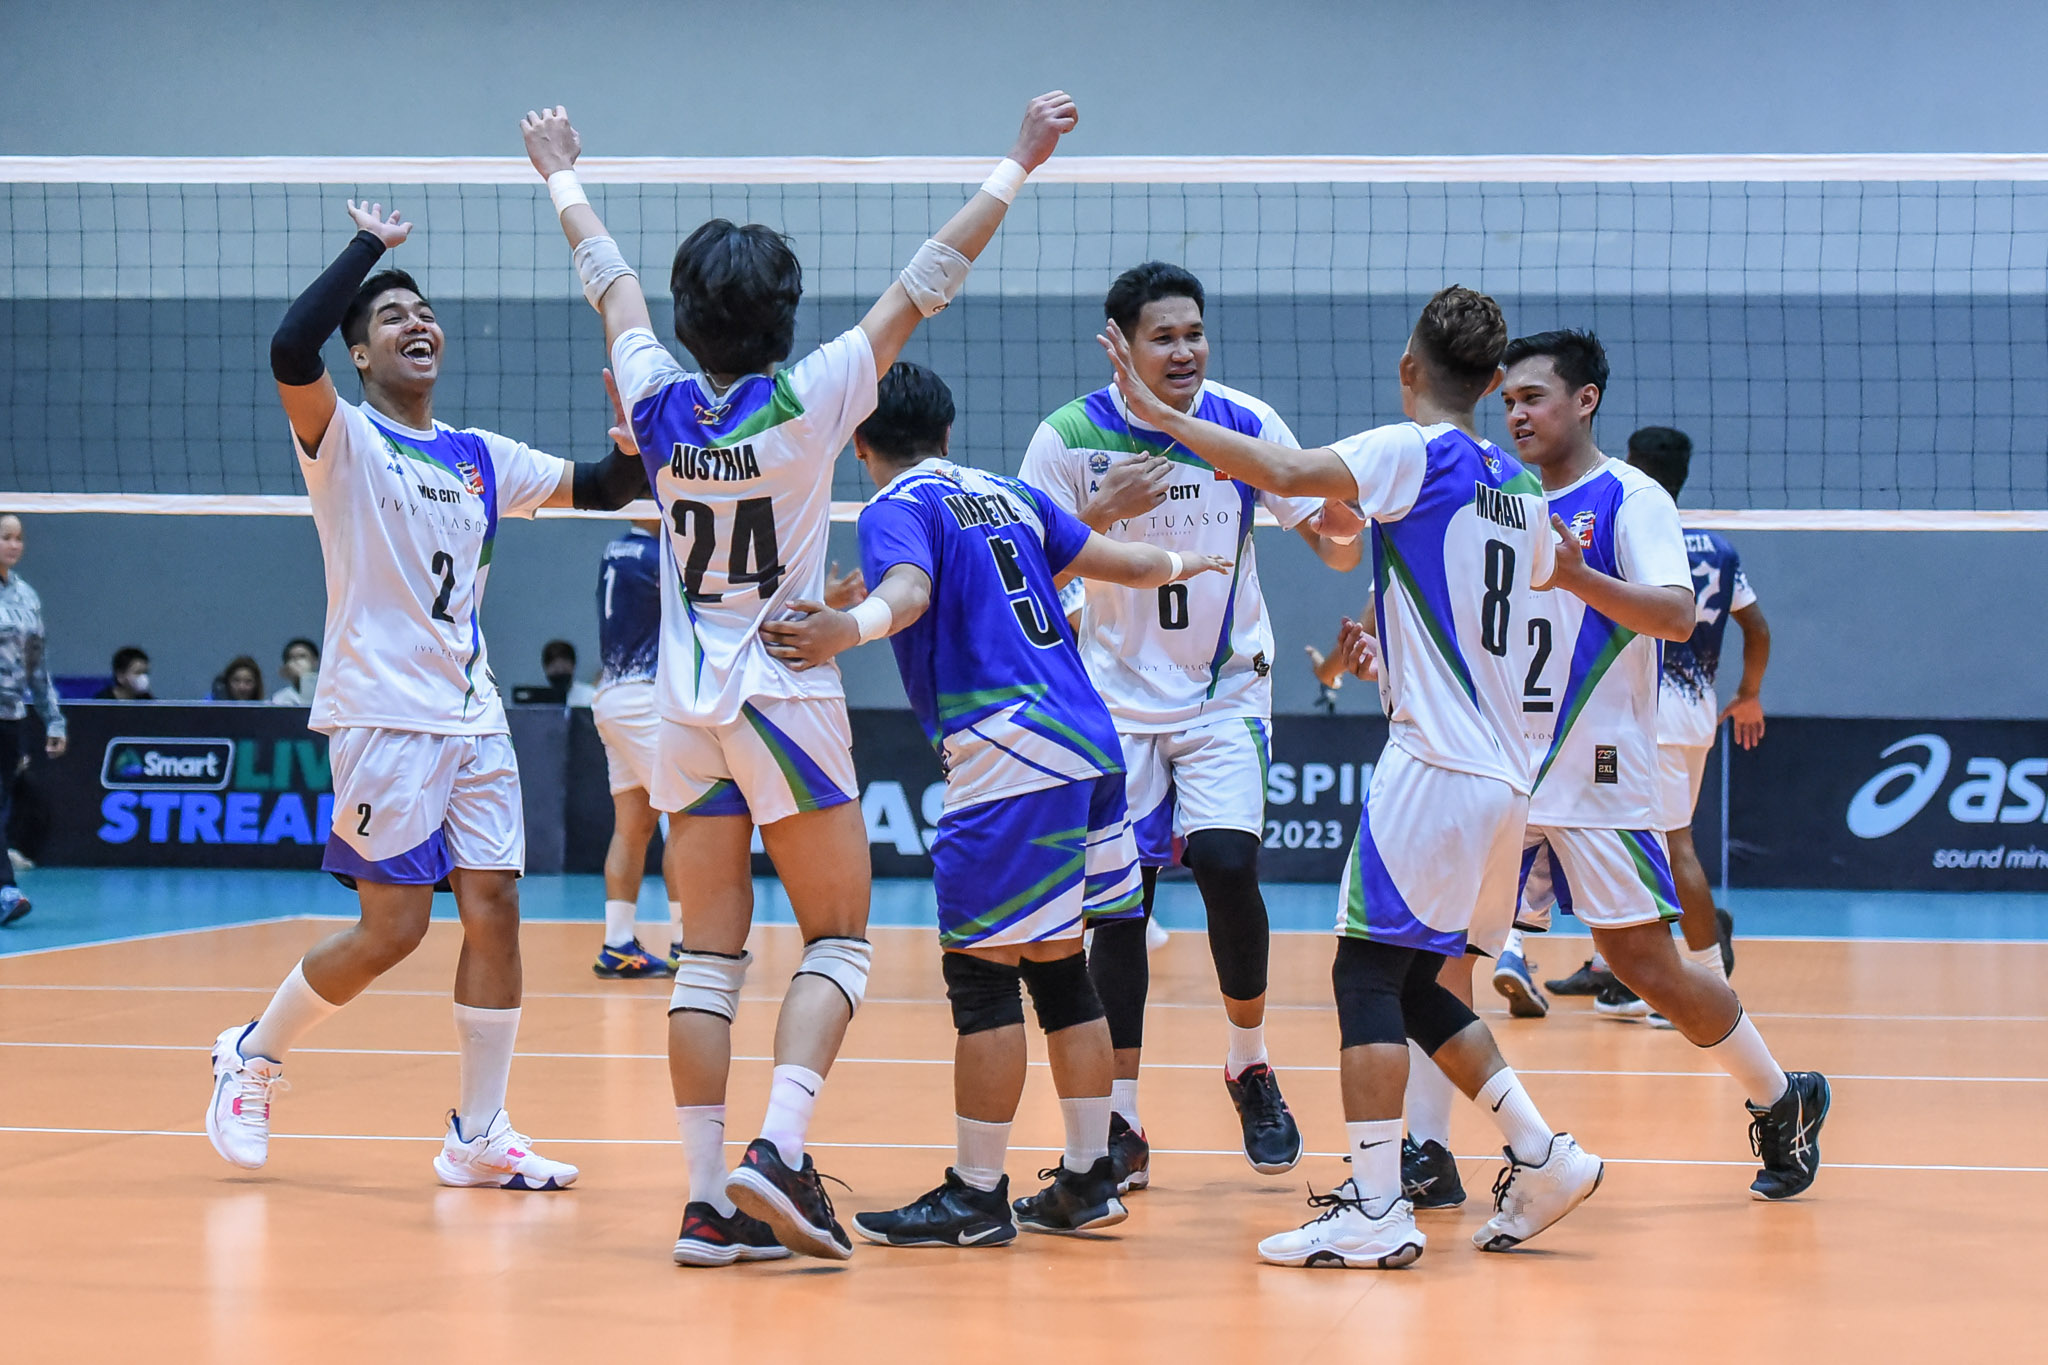 Imus City AJAA Spikers in the Spikers' Turf. –PVL PHOTO